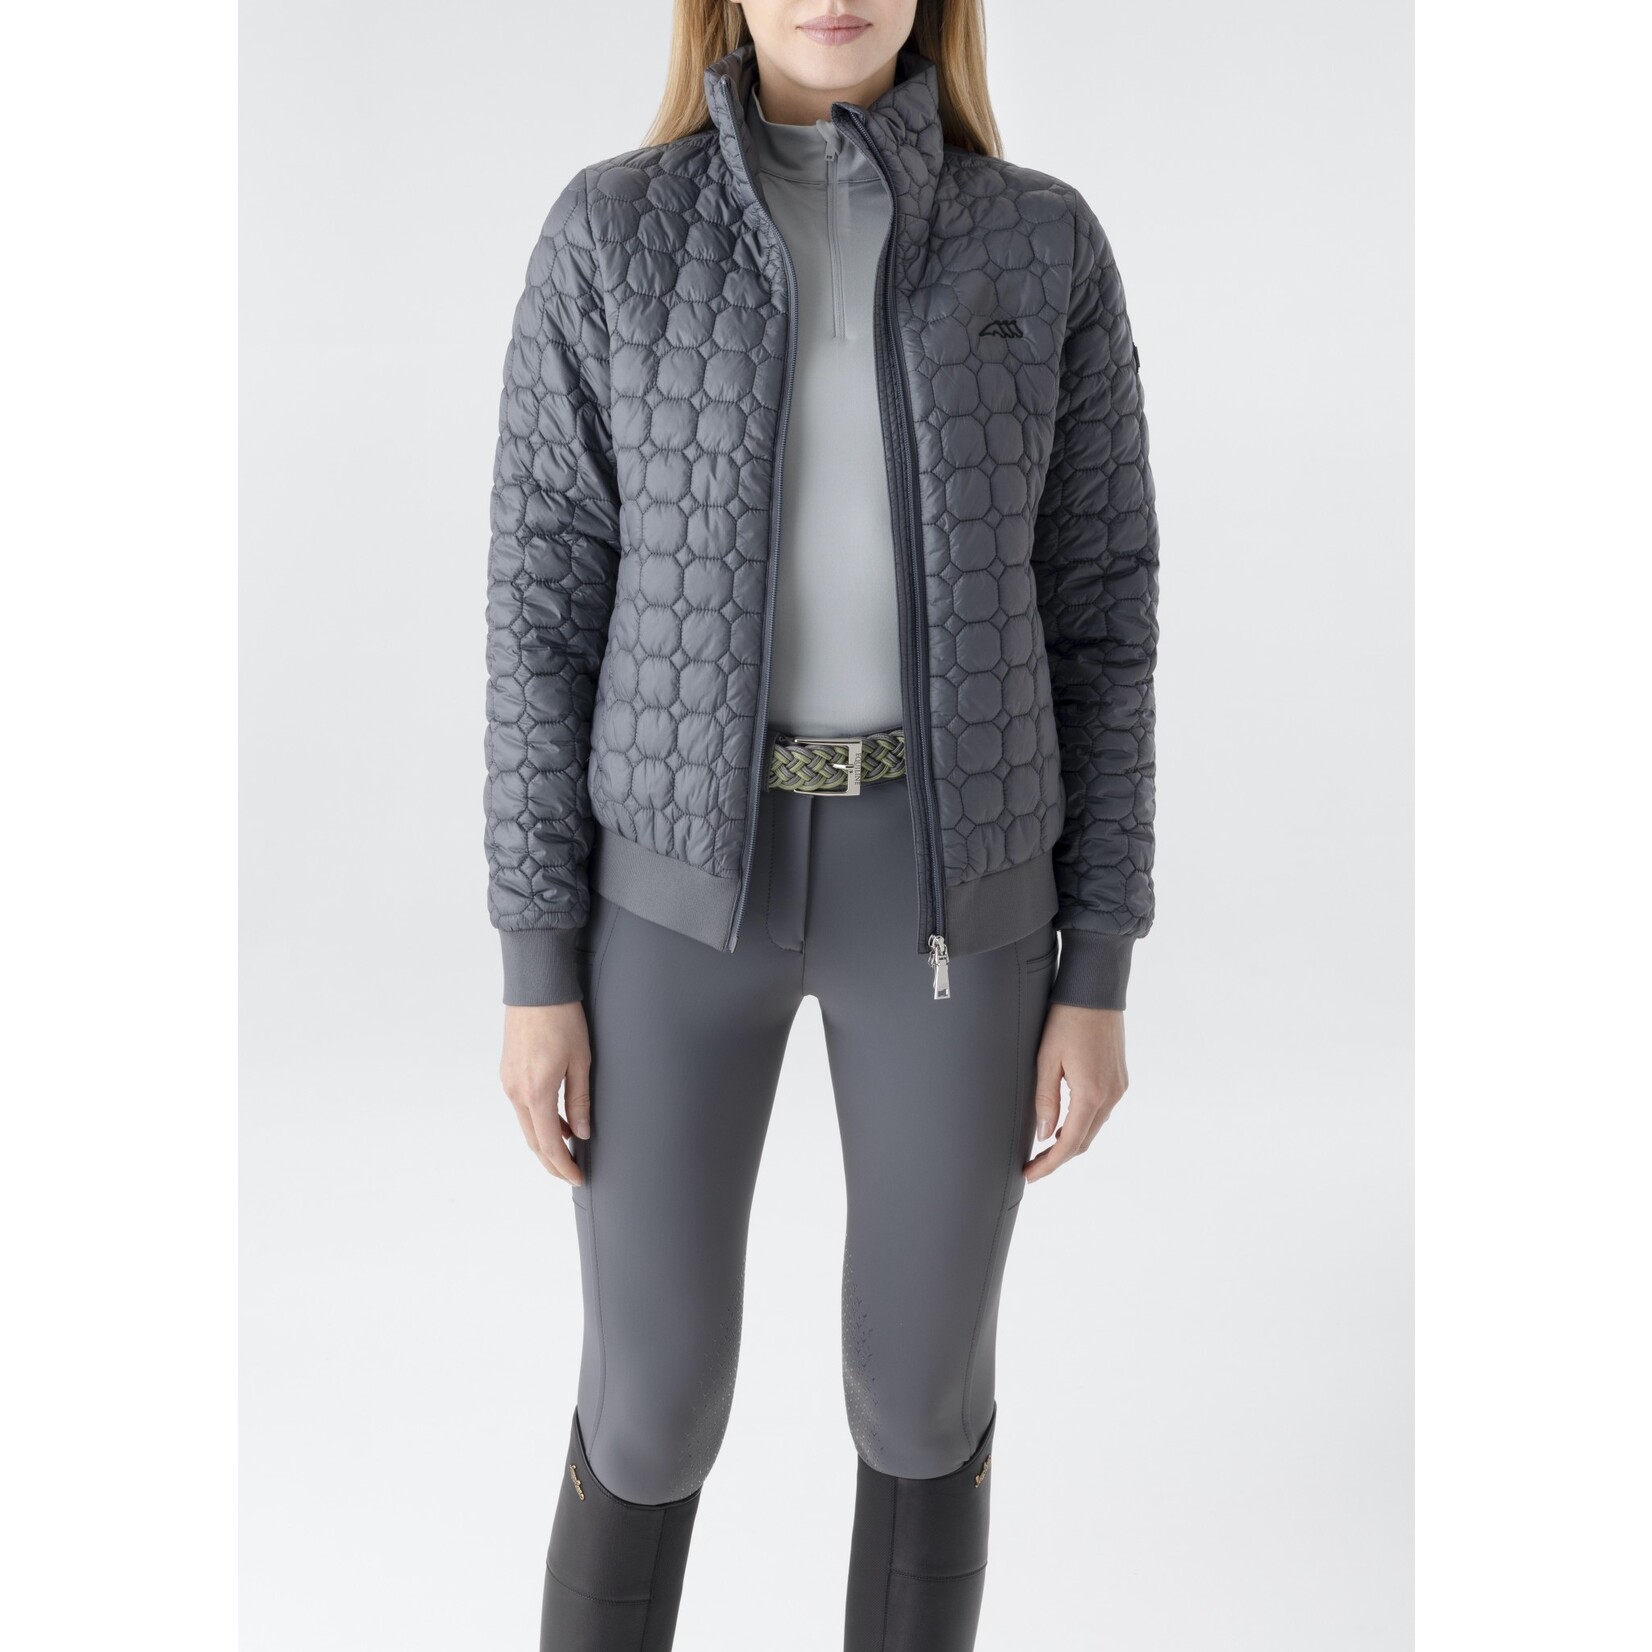 Equiline Q10740 Equiline Edae Women's Octagon Quilted Bomber Jacket